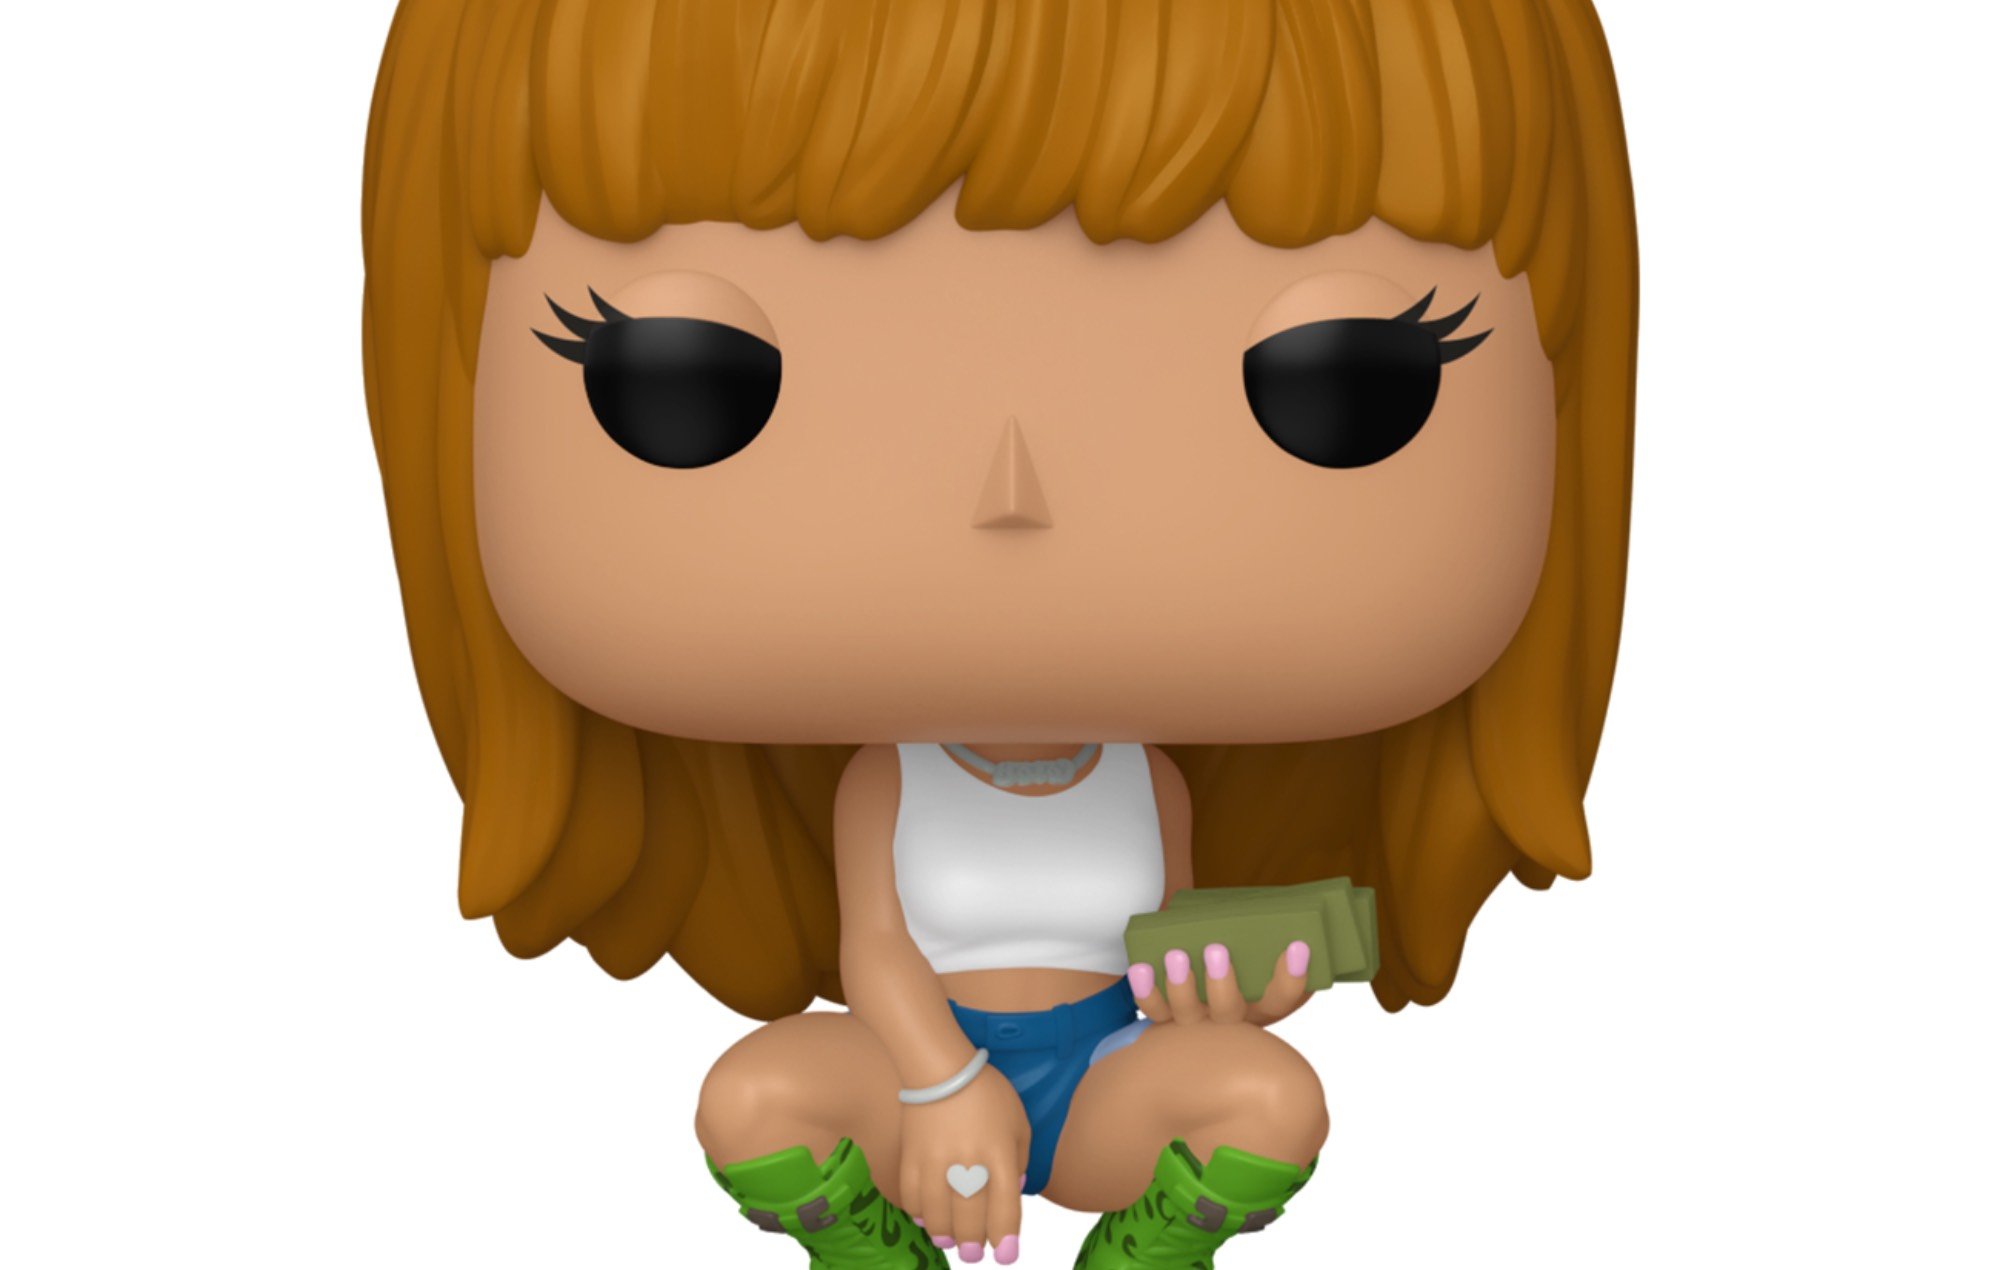 Ice Spice now has her own Pop! Funko doll